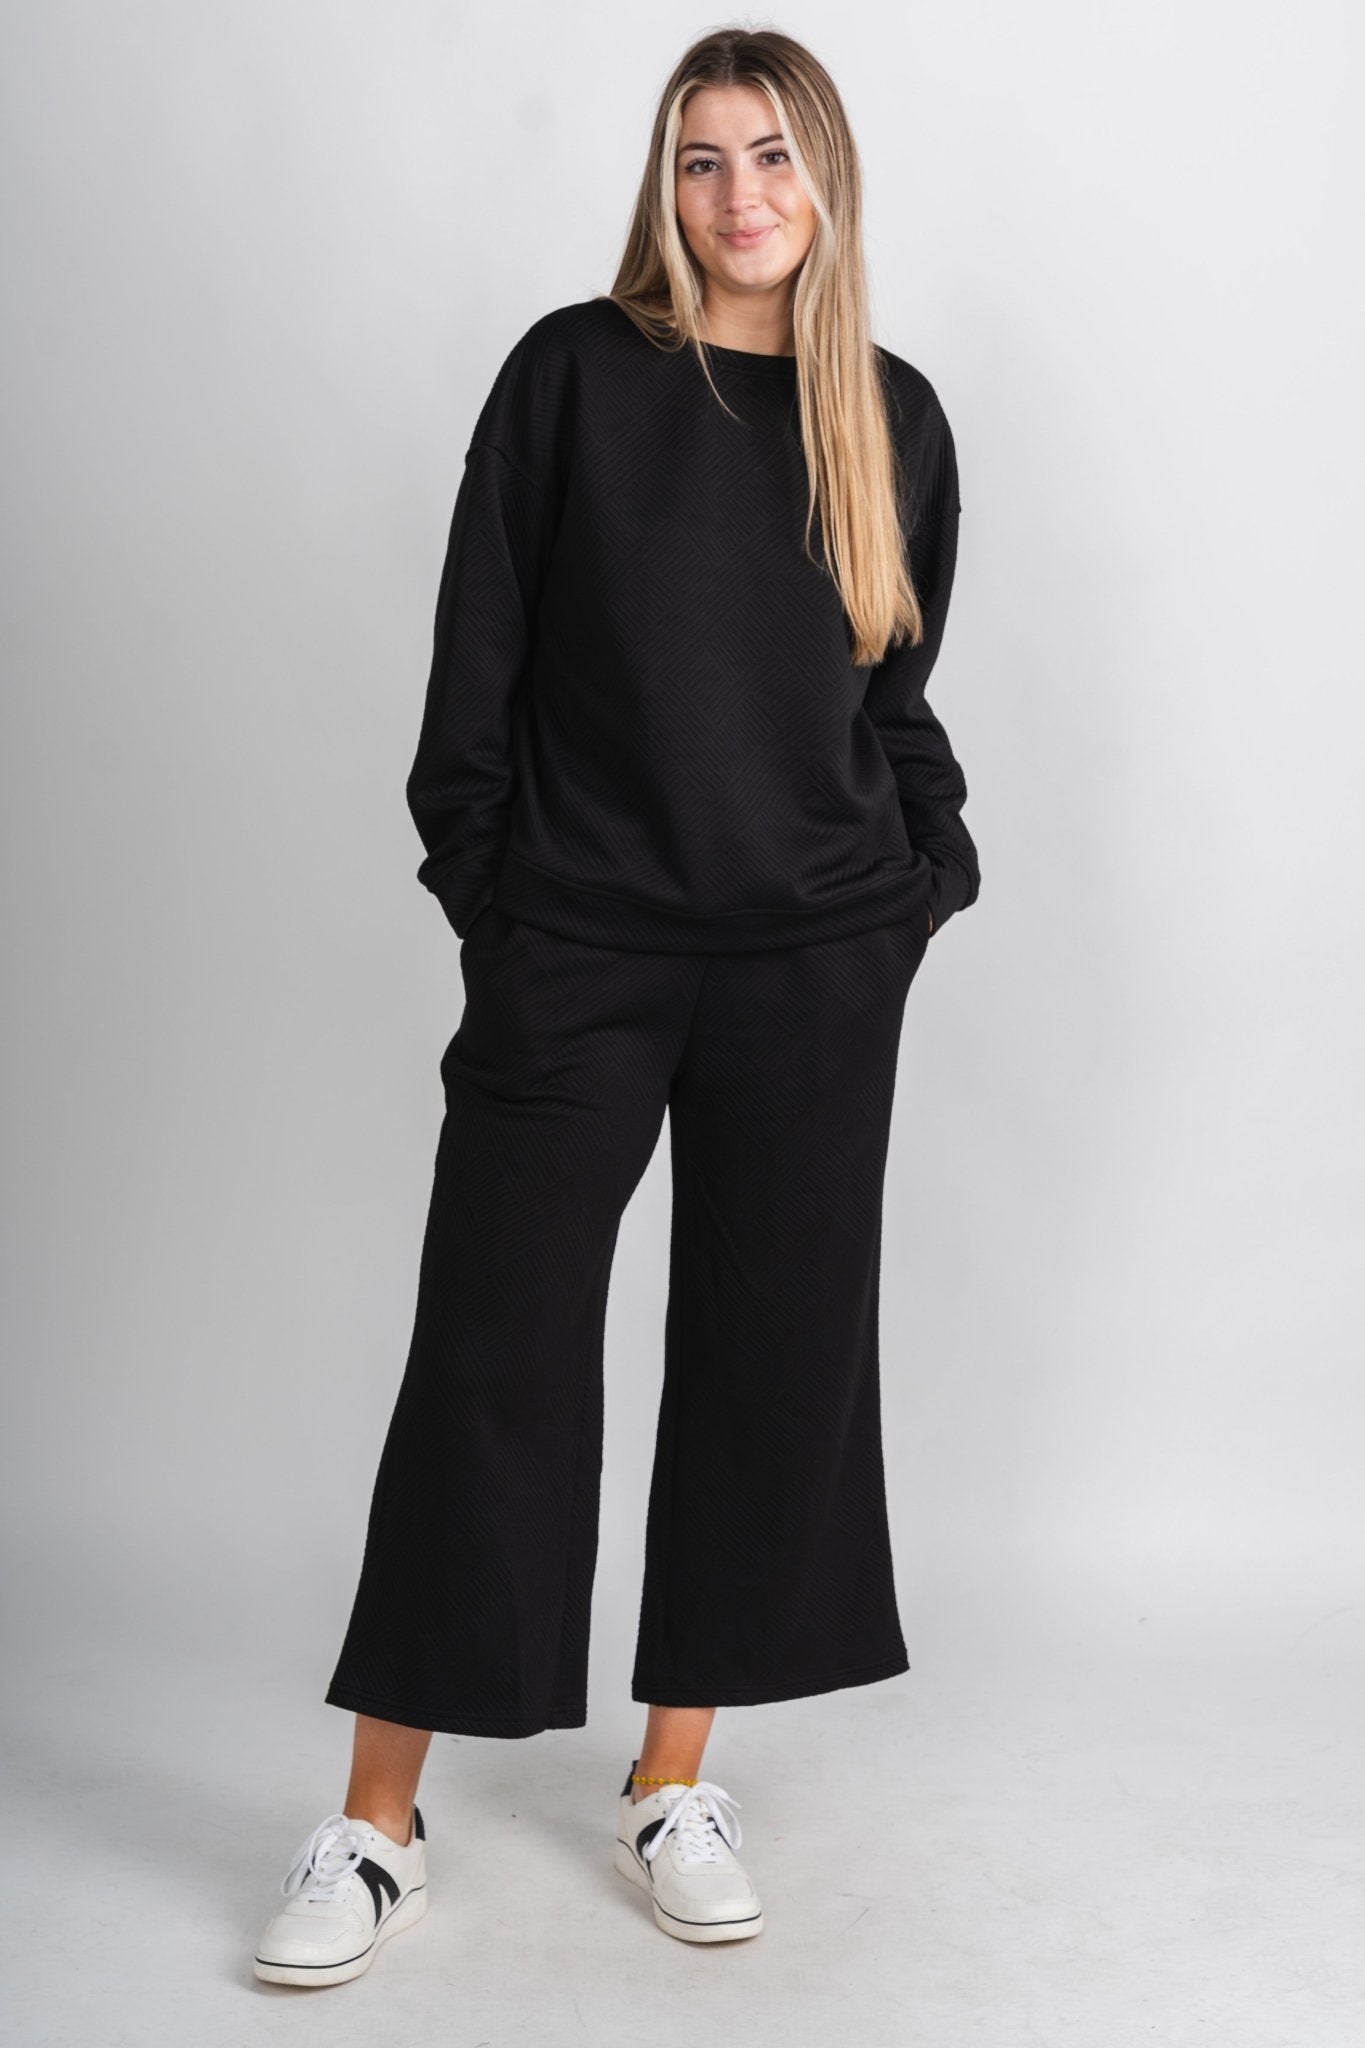 Textured crop pants black - Stylish Pants - Trendy Lounge Sets at Lush Fashion Lounge Boutique in Oklahoma City